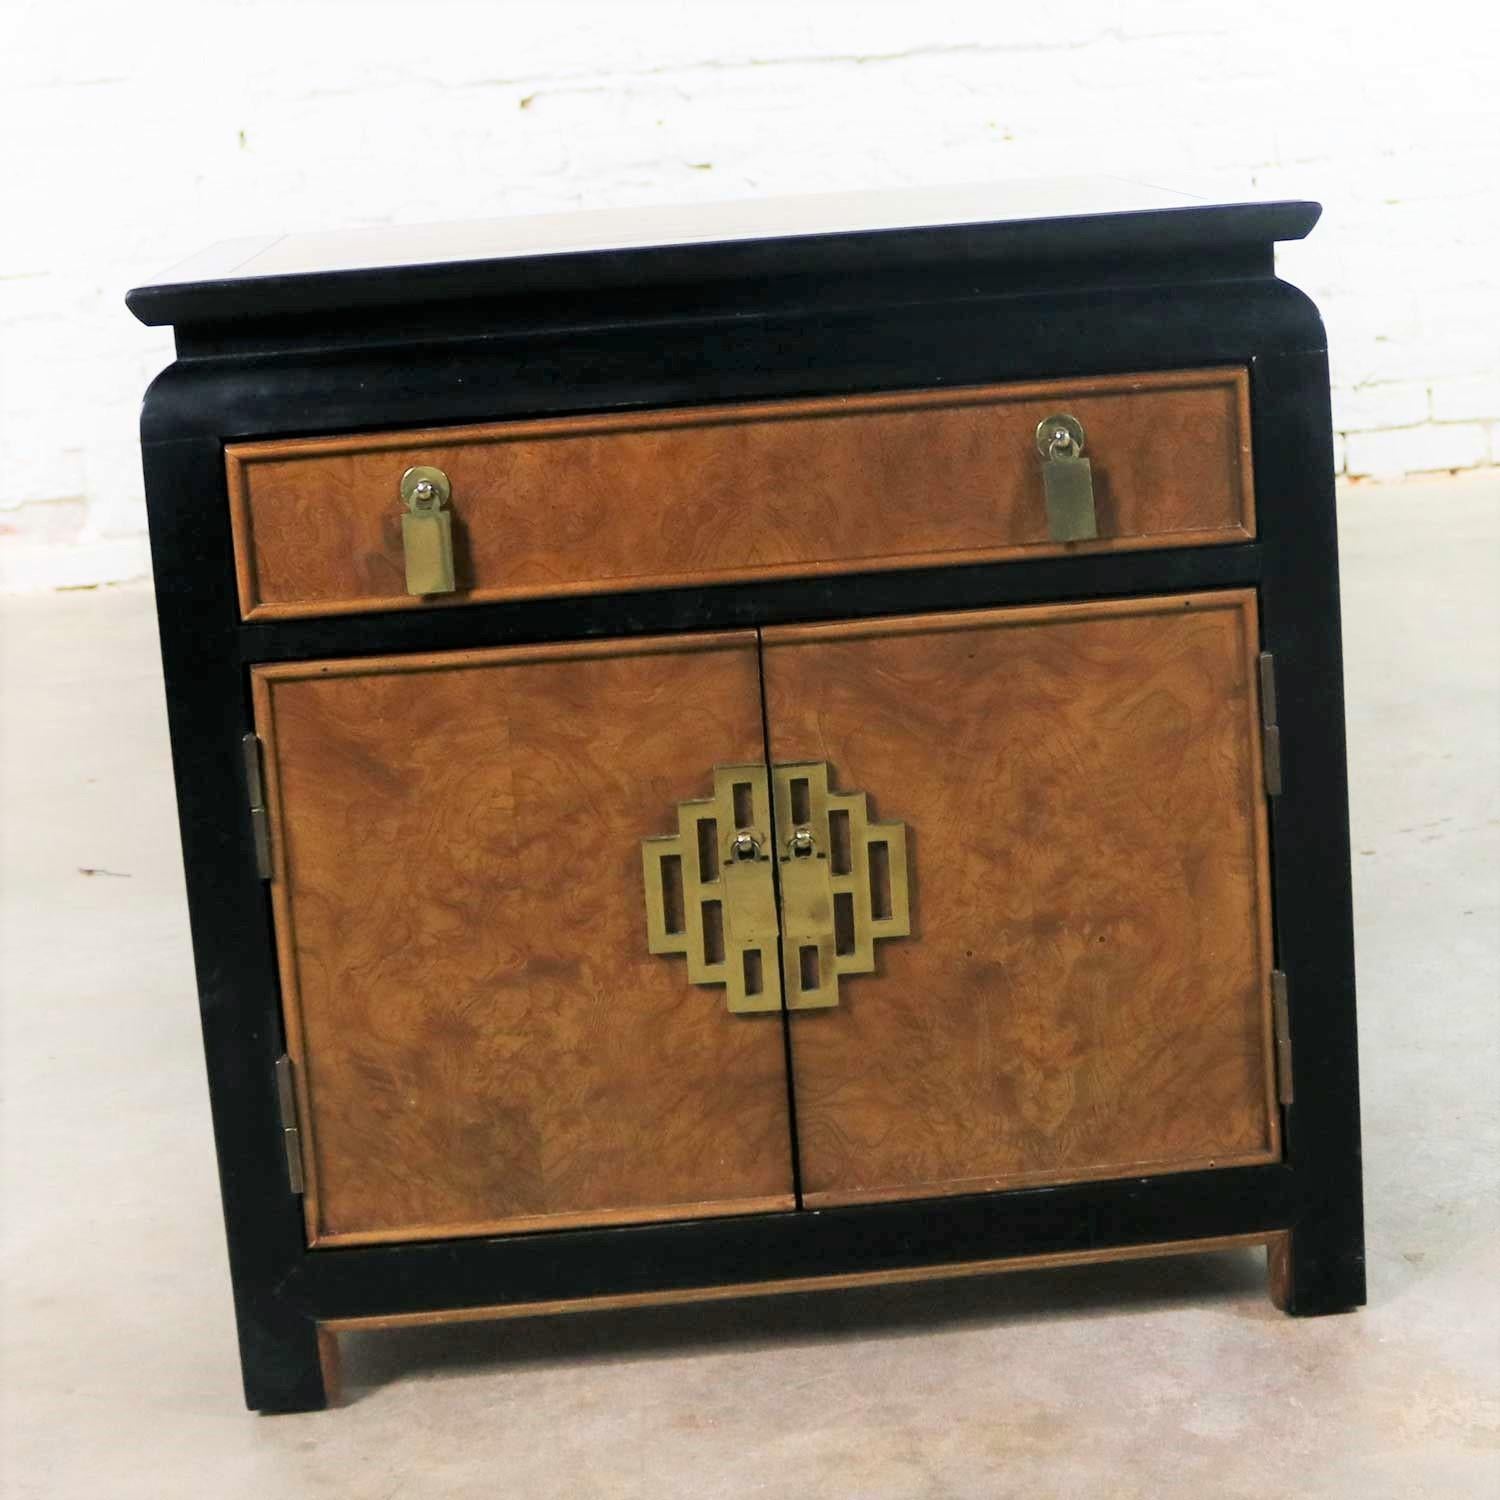 Handsome Hollywood Regency chinoiserie nightstand or end table cabinet designed by Raymond K. Sobota for his Chin Hua collection for Century Furniture. It is in wonderful vintage condition overall. It does have normal signs of age and use but